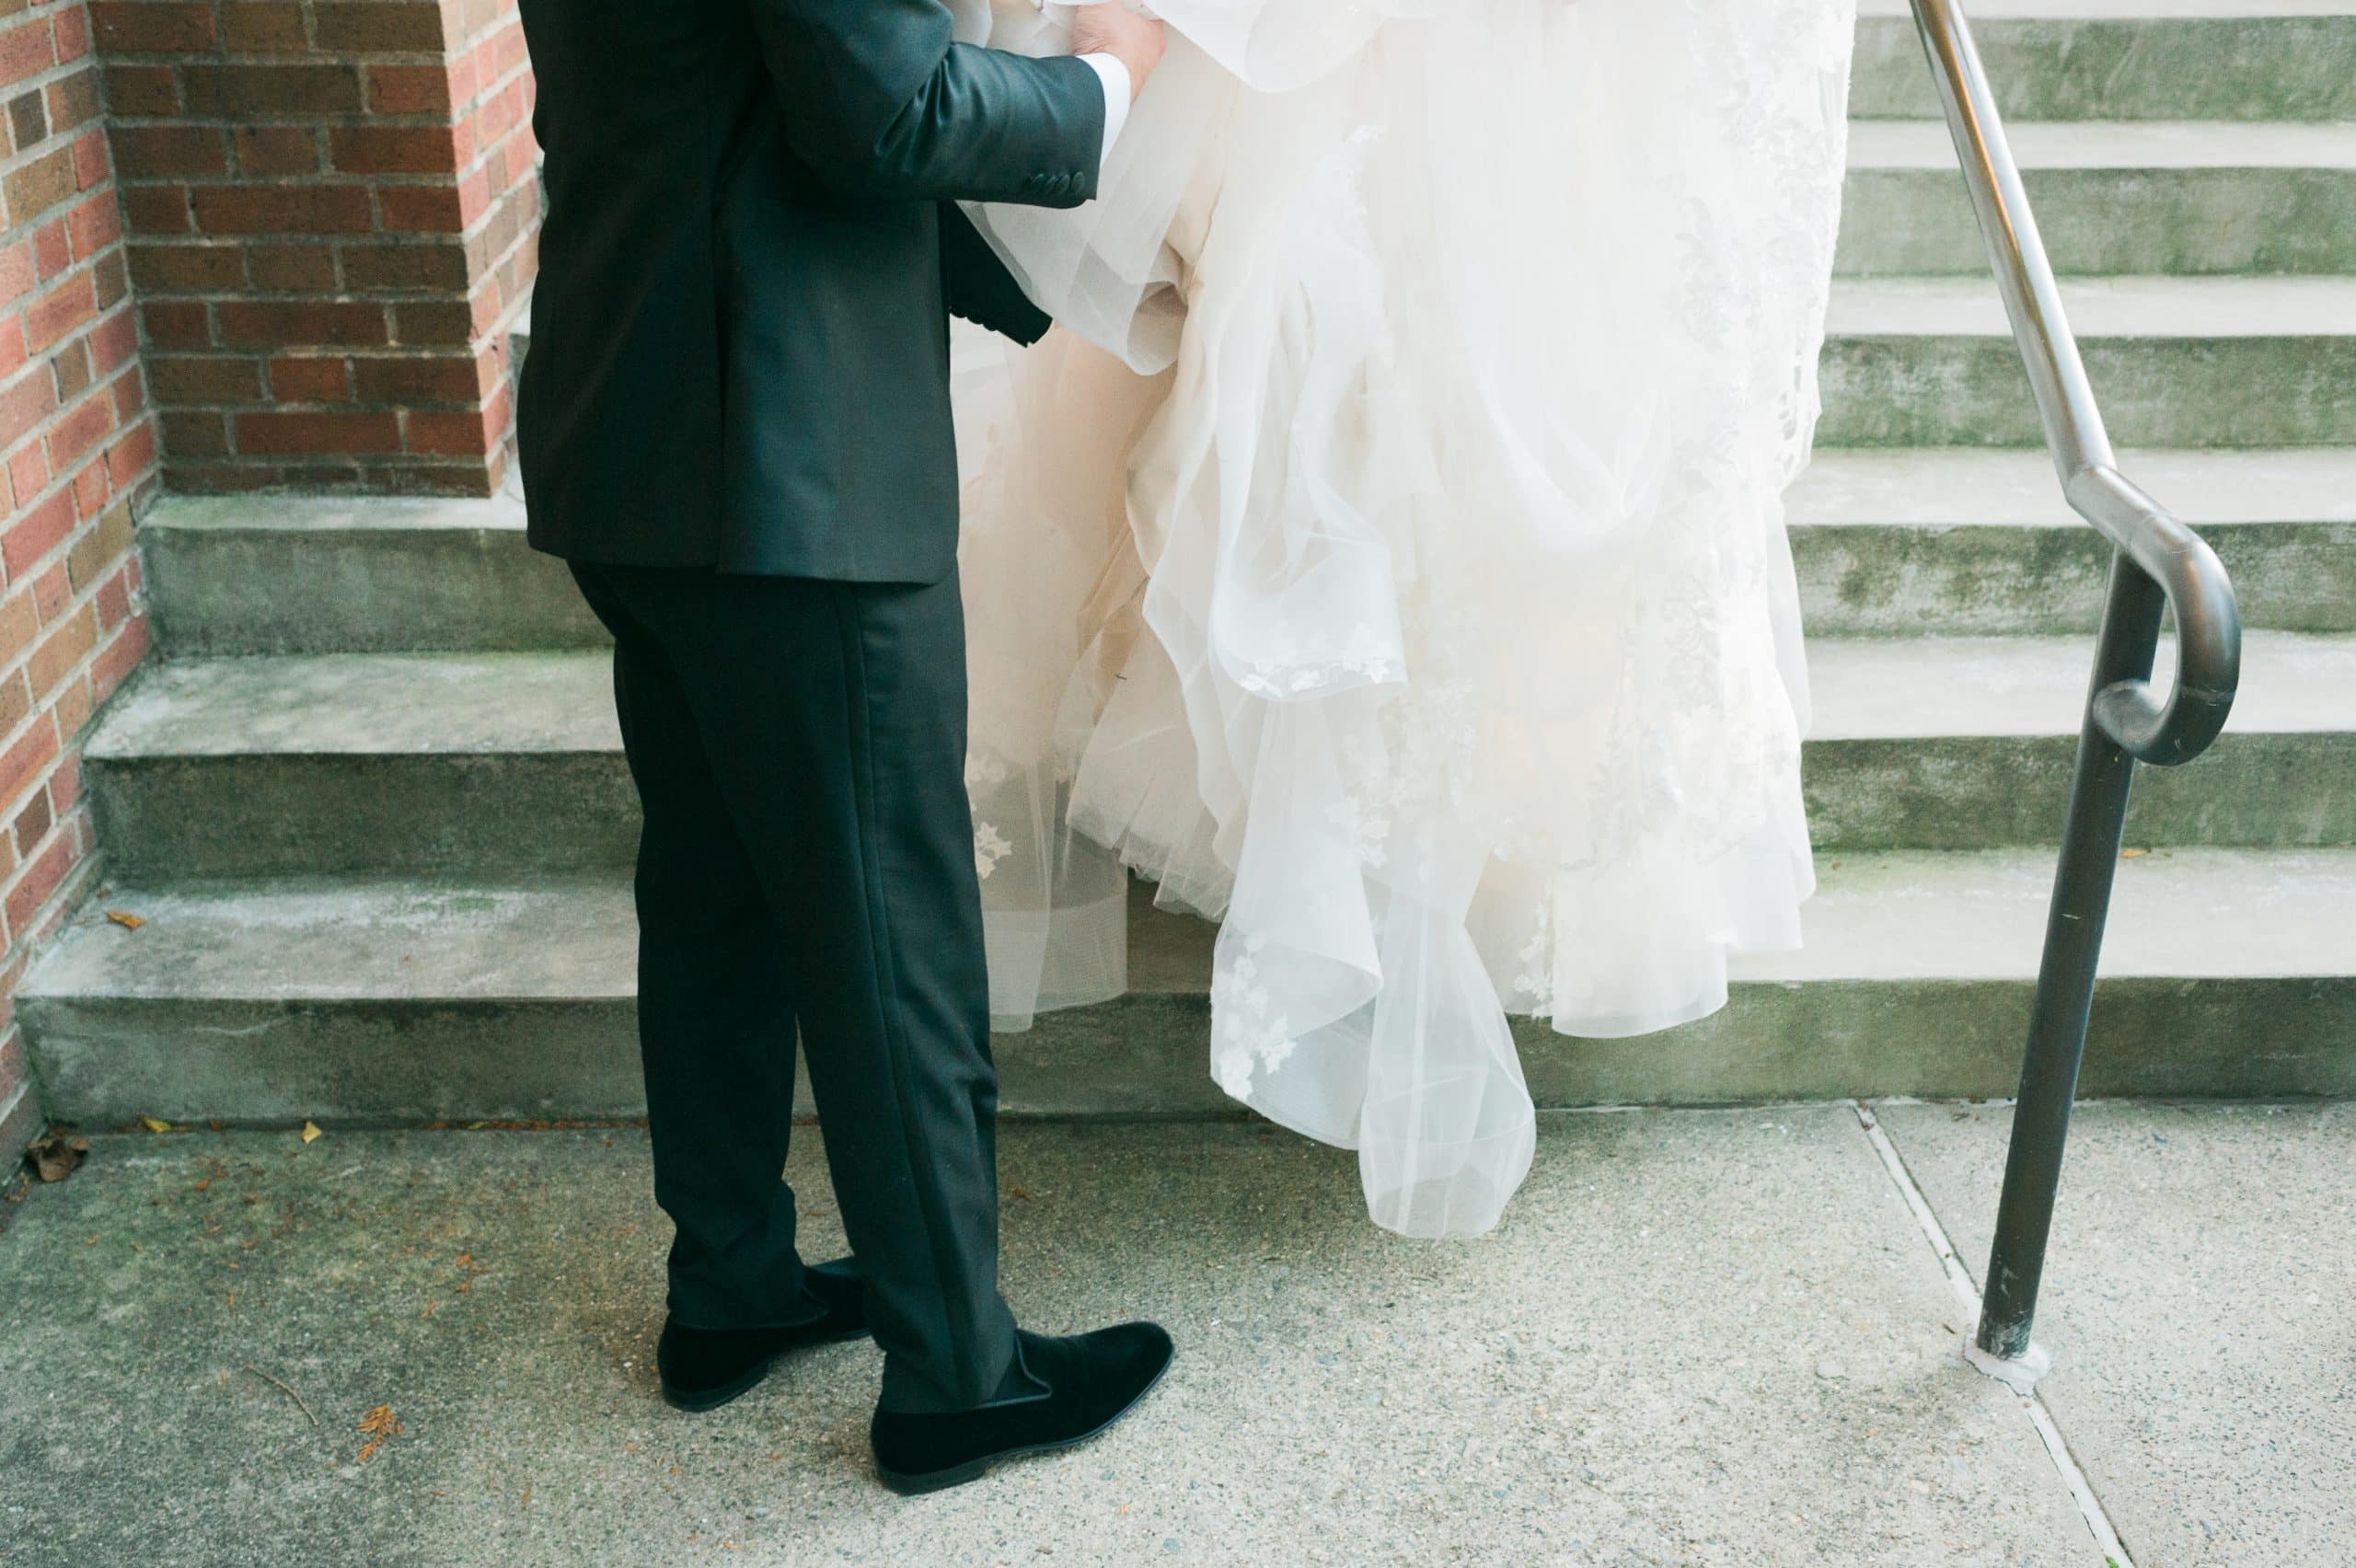 North Jersey COVID microwedding captured by candid, documentary NJ wedding photographer Ben Lau.